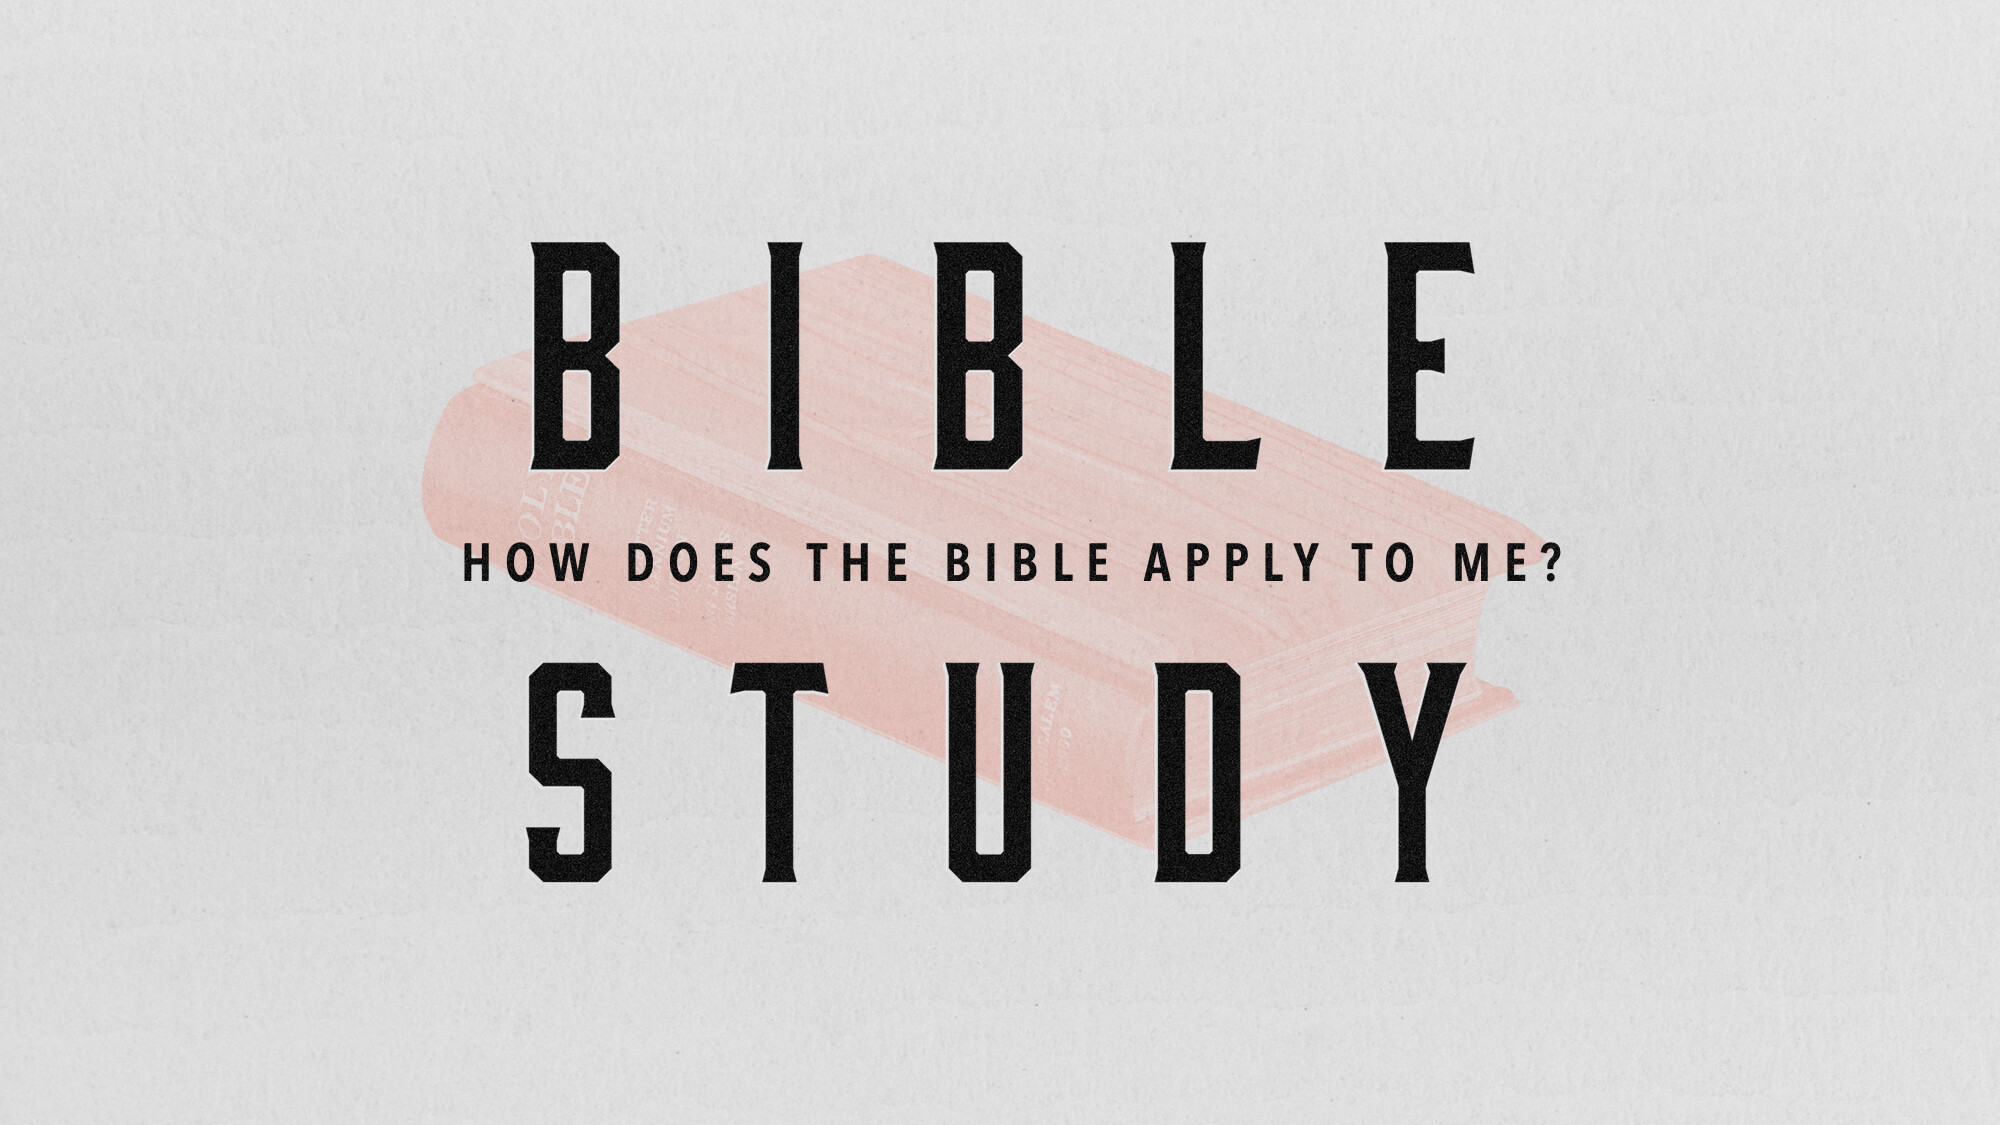 How Does the Bible Apply To Me?